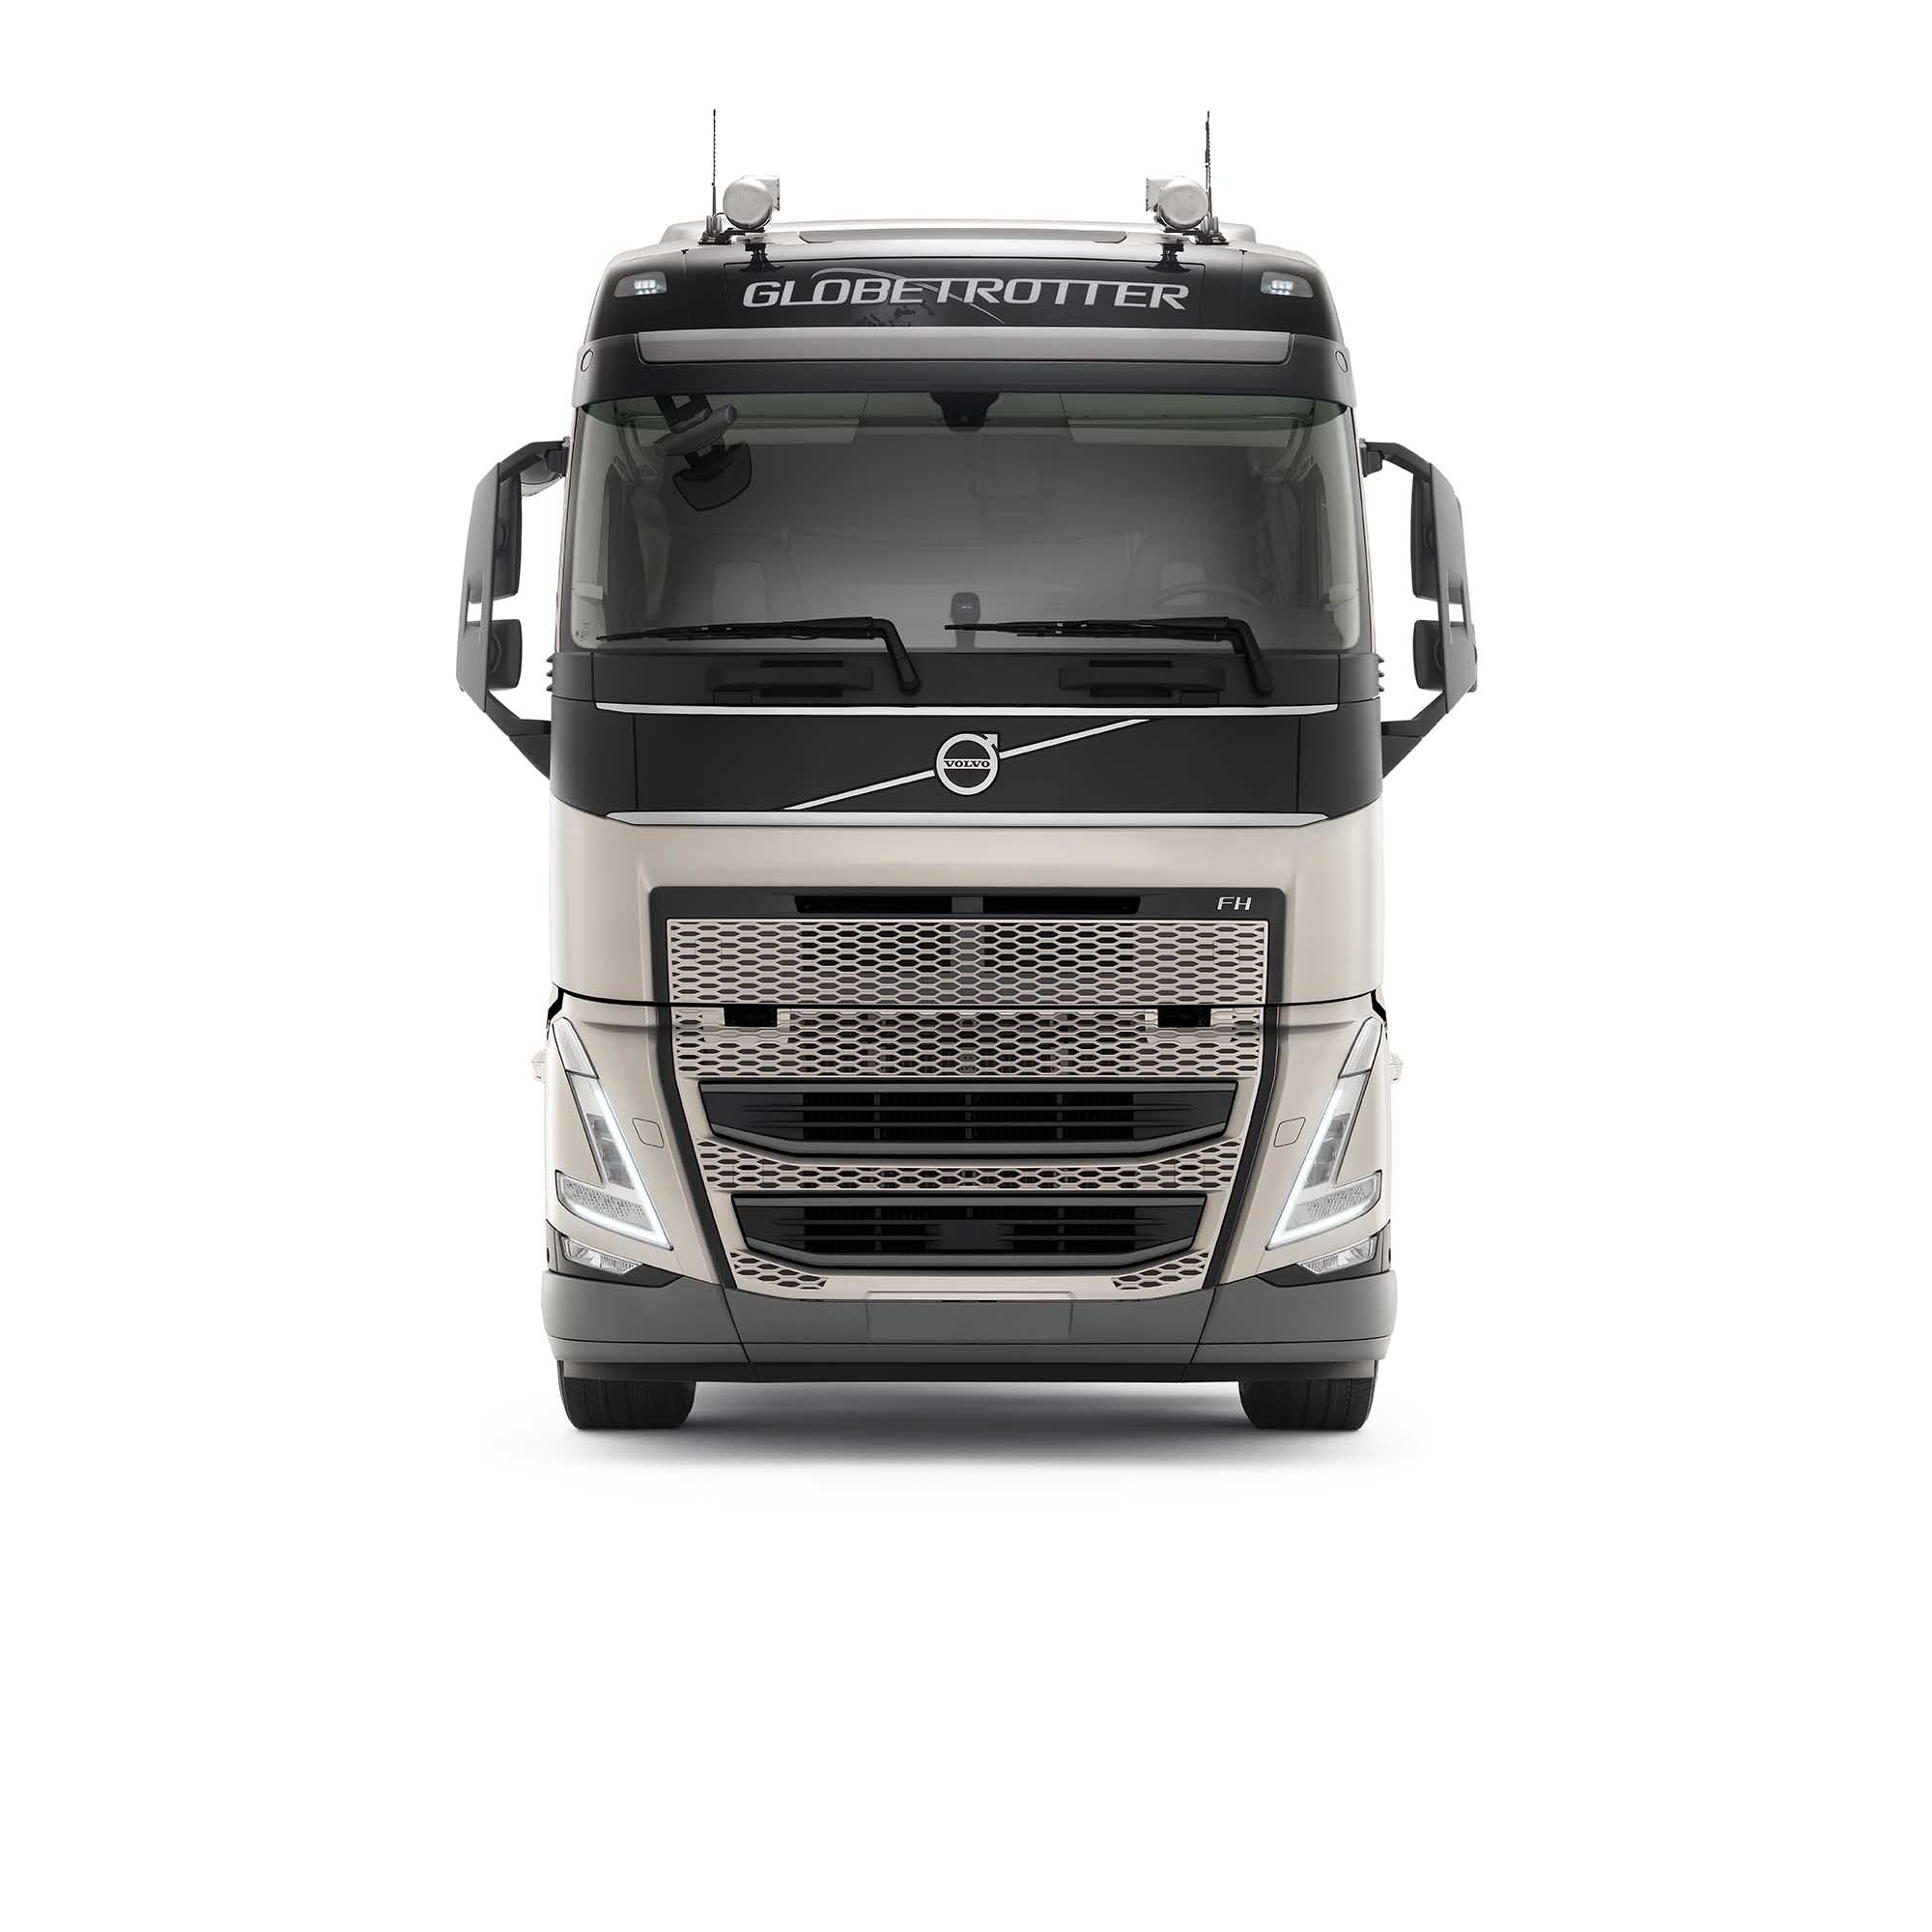 Volvo FH – the long haul truck